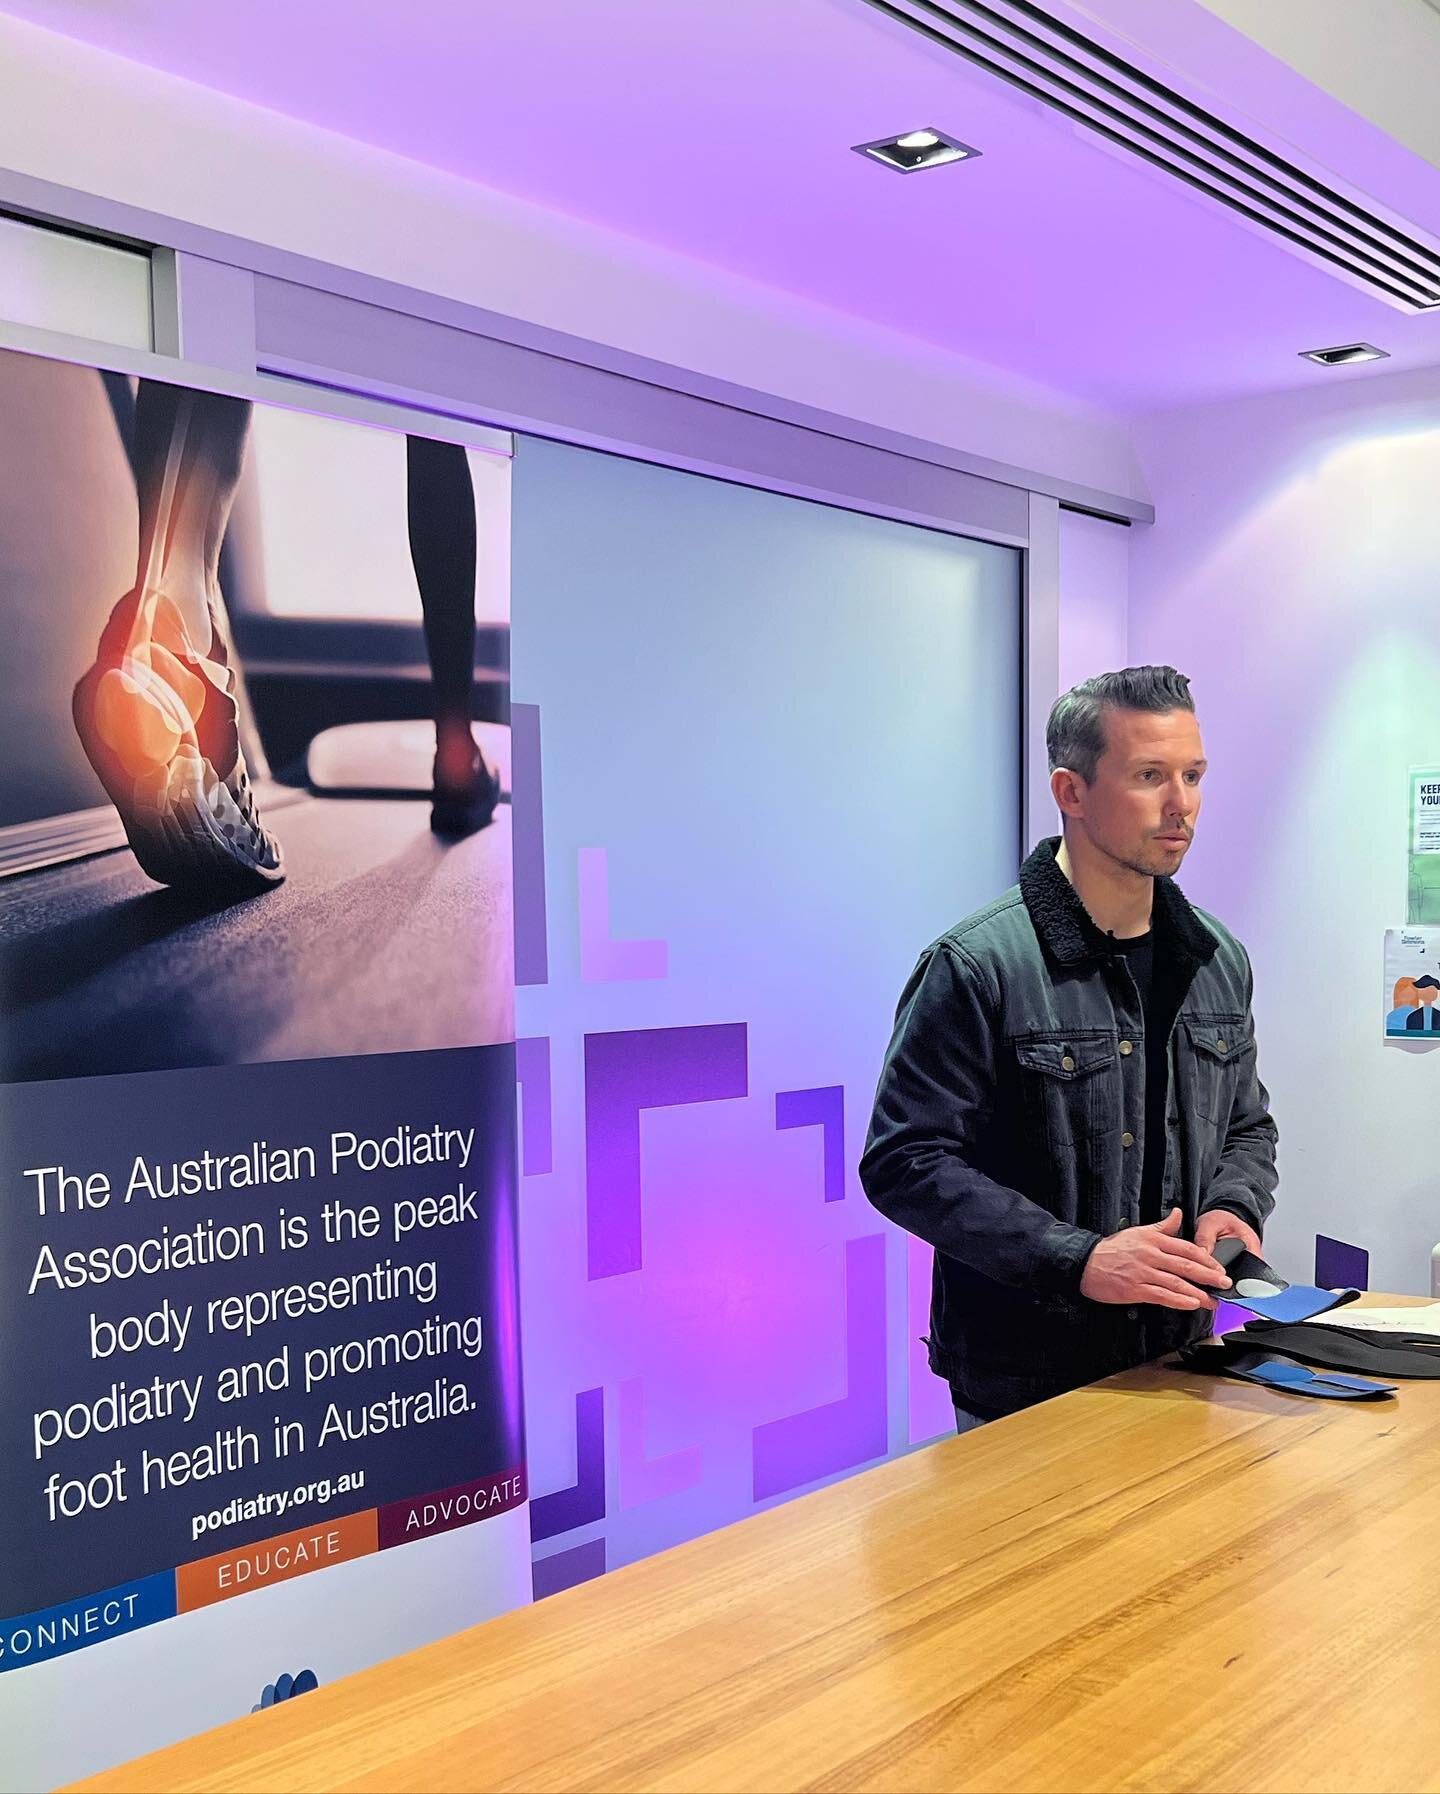 One of our directors, Michael, giving some advice on how our orthotic prescription variables can help manage forefoot pathologies with the Australian Podiatry Association webinar last night!